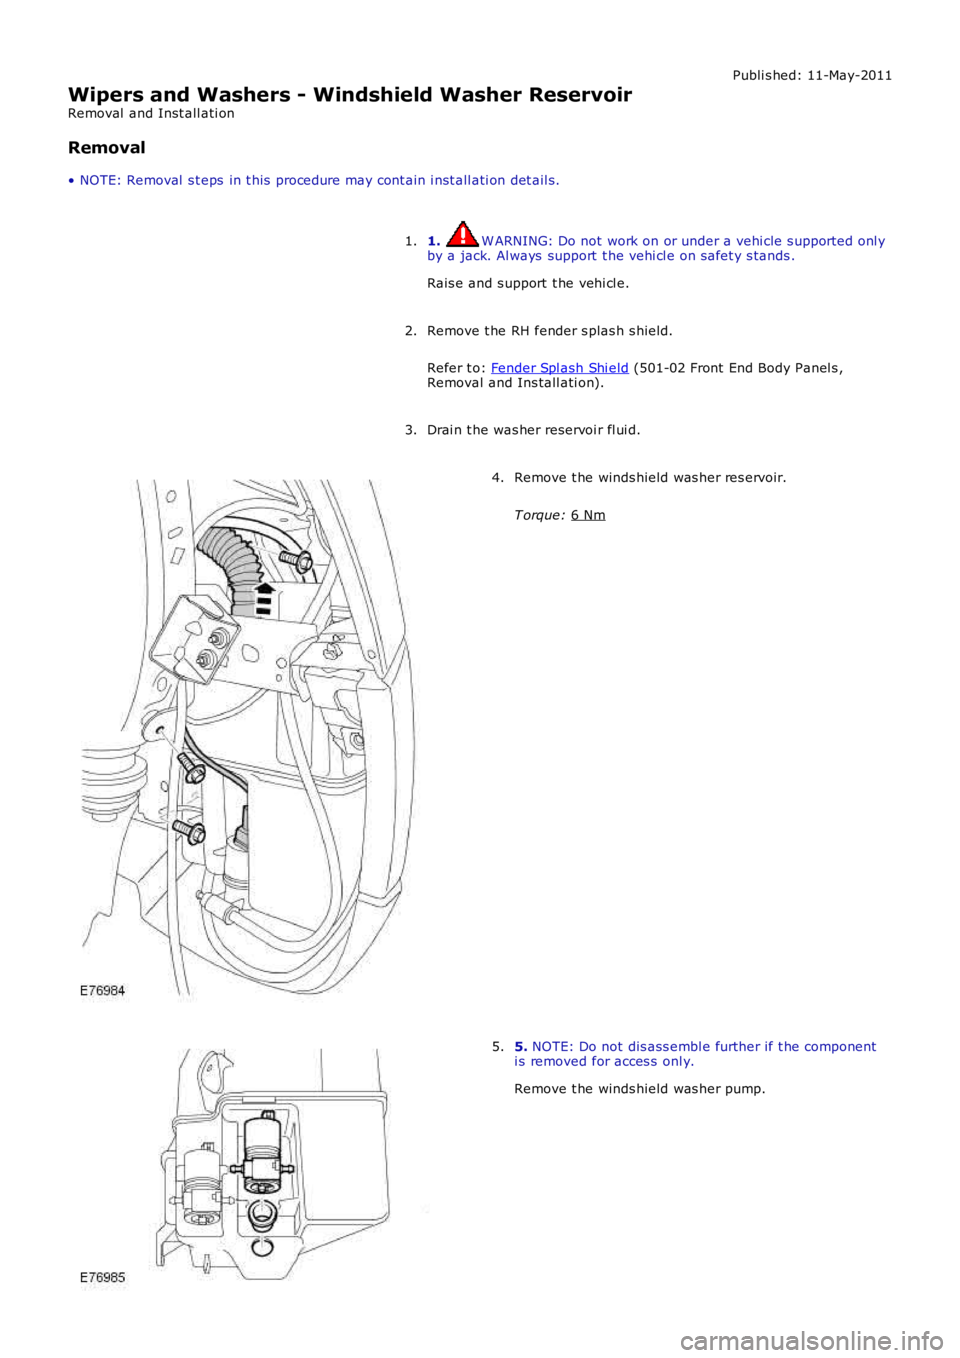 LAND ROVER FRELANDER 2 2006  Repair Manual Publi s hed: 11-May-2011
Wipers and Washers - Windshield Washer Reservoir
Removal  and Inst all ati on
Removal
• NOTE: Removal  s t eps  in t his  procedure may cont ain i nst all ati on det ail s.
